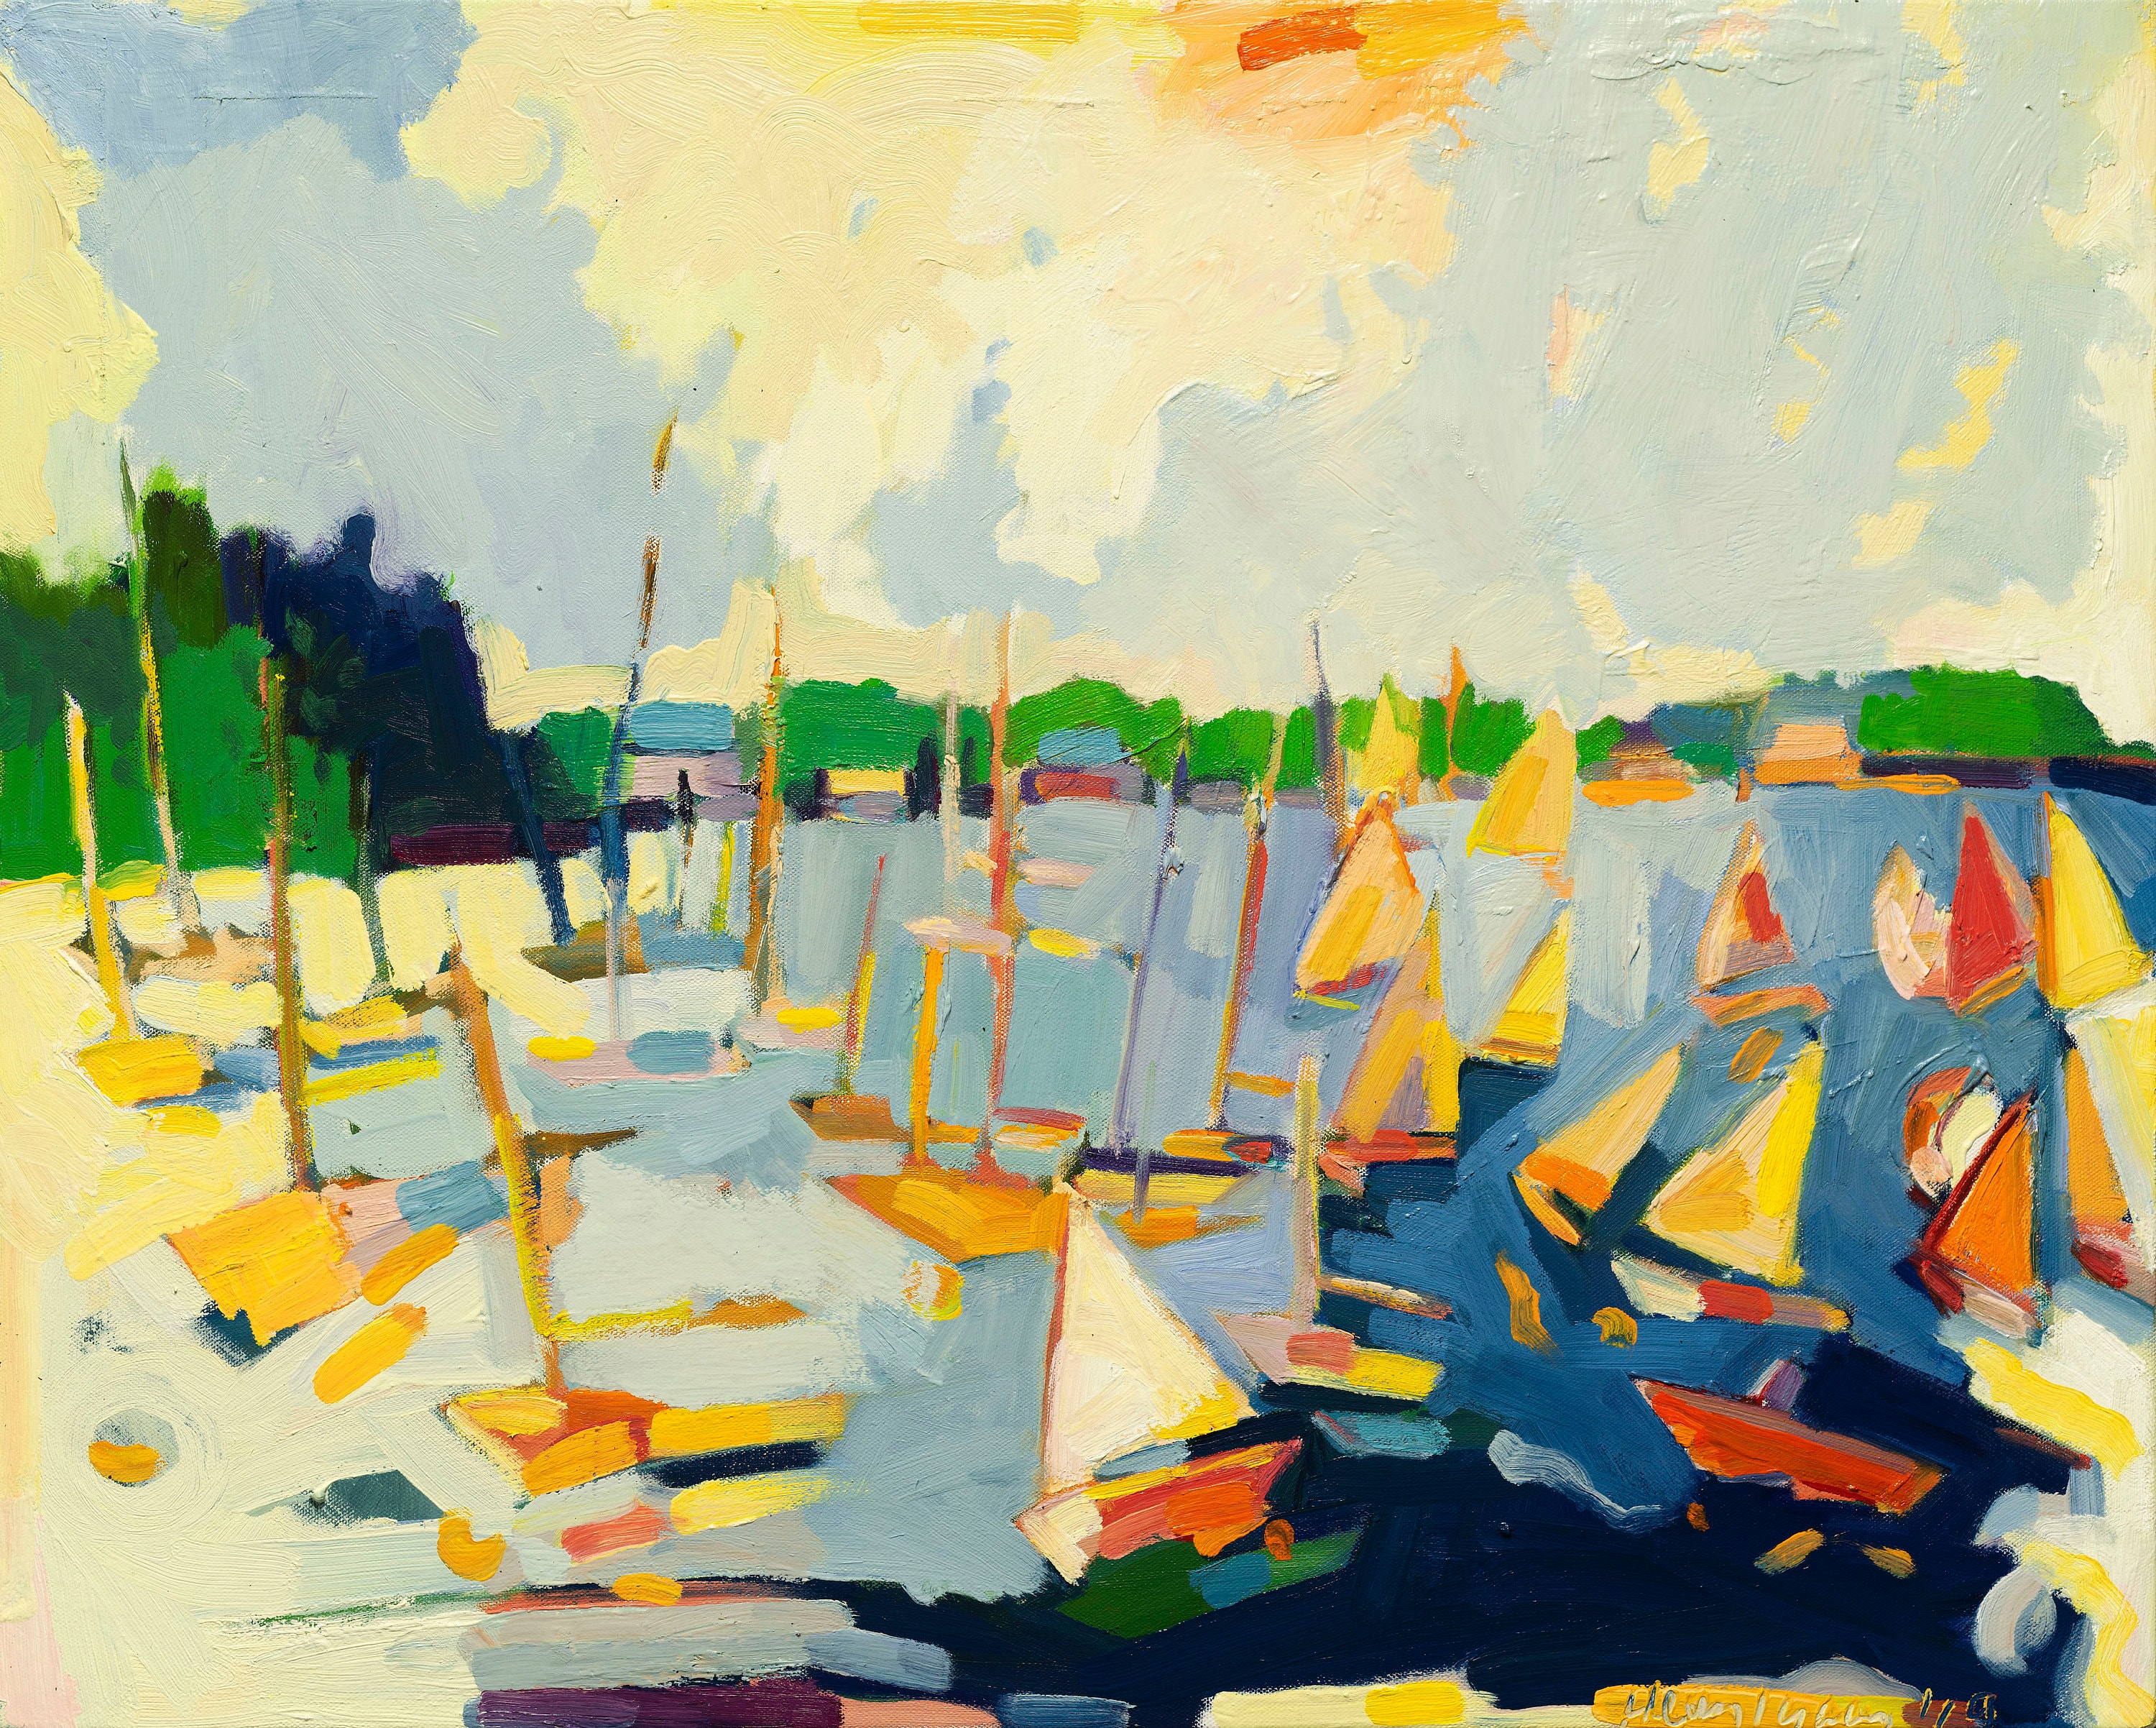 8 x 10 Sailing School Boothbay Harbor limited giclee edition of ONLY FIVE  signed and numbered NEW Maine